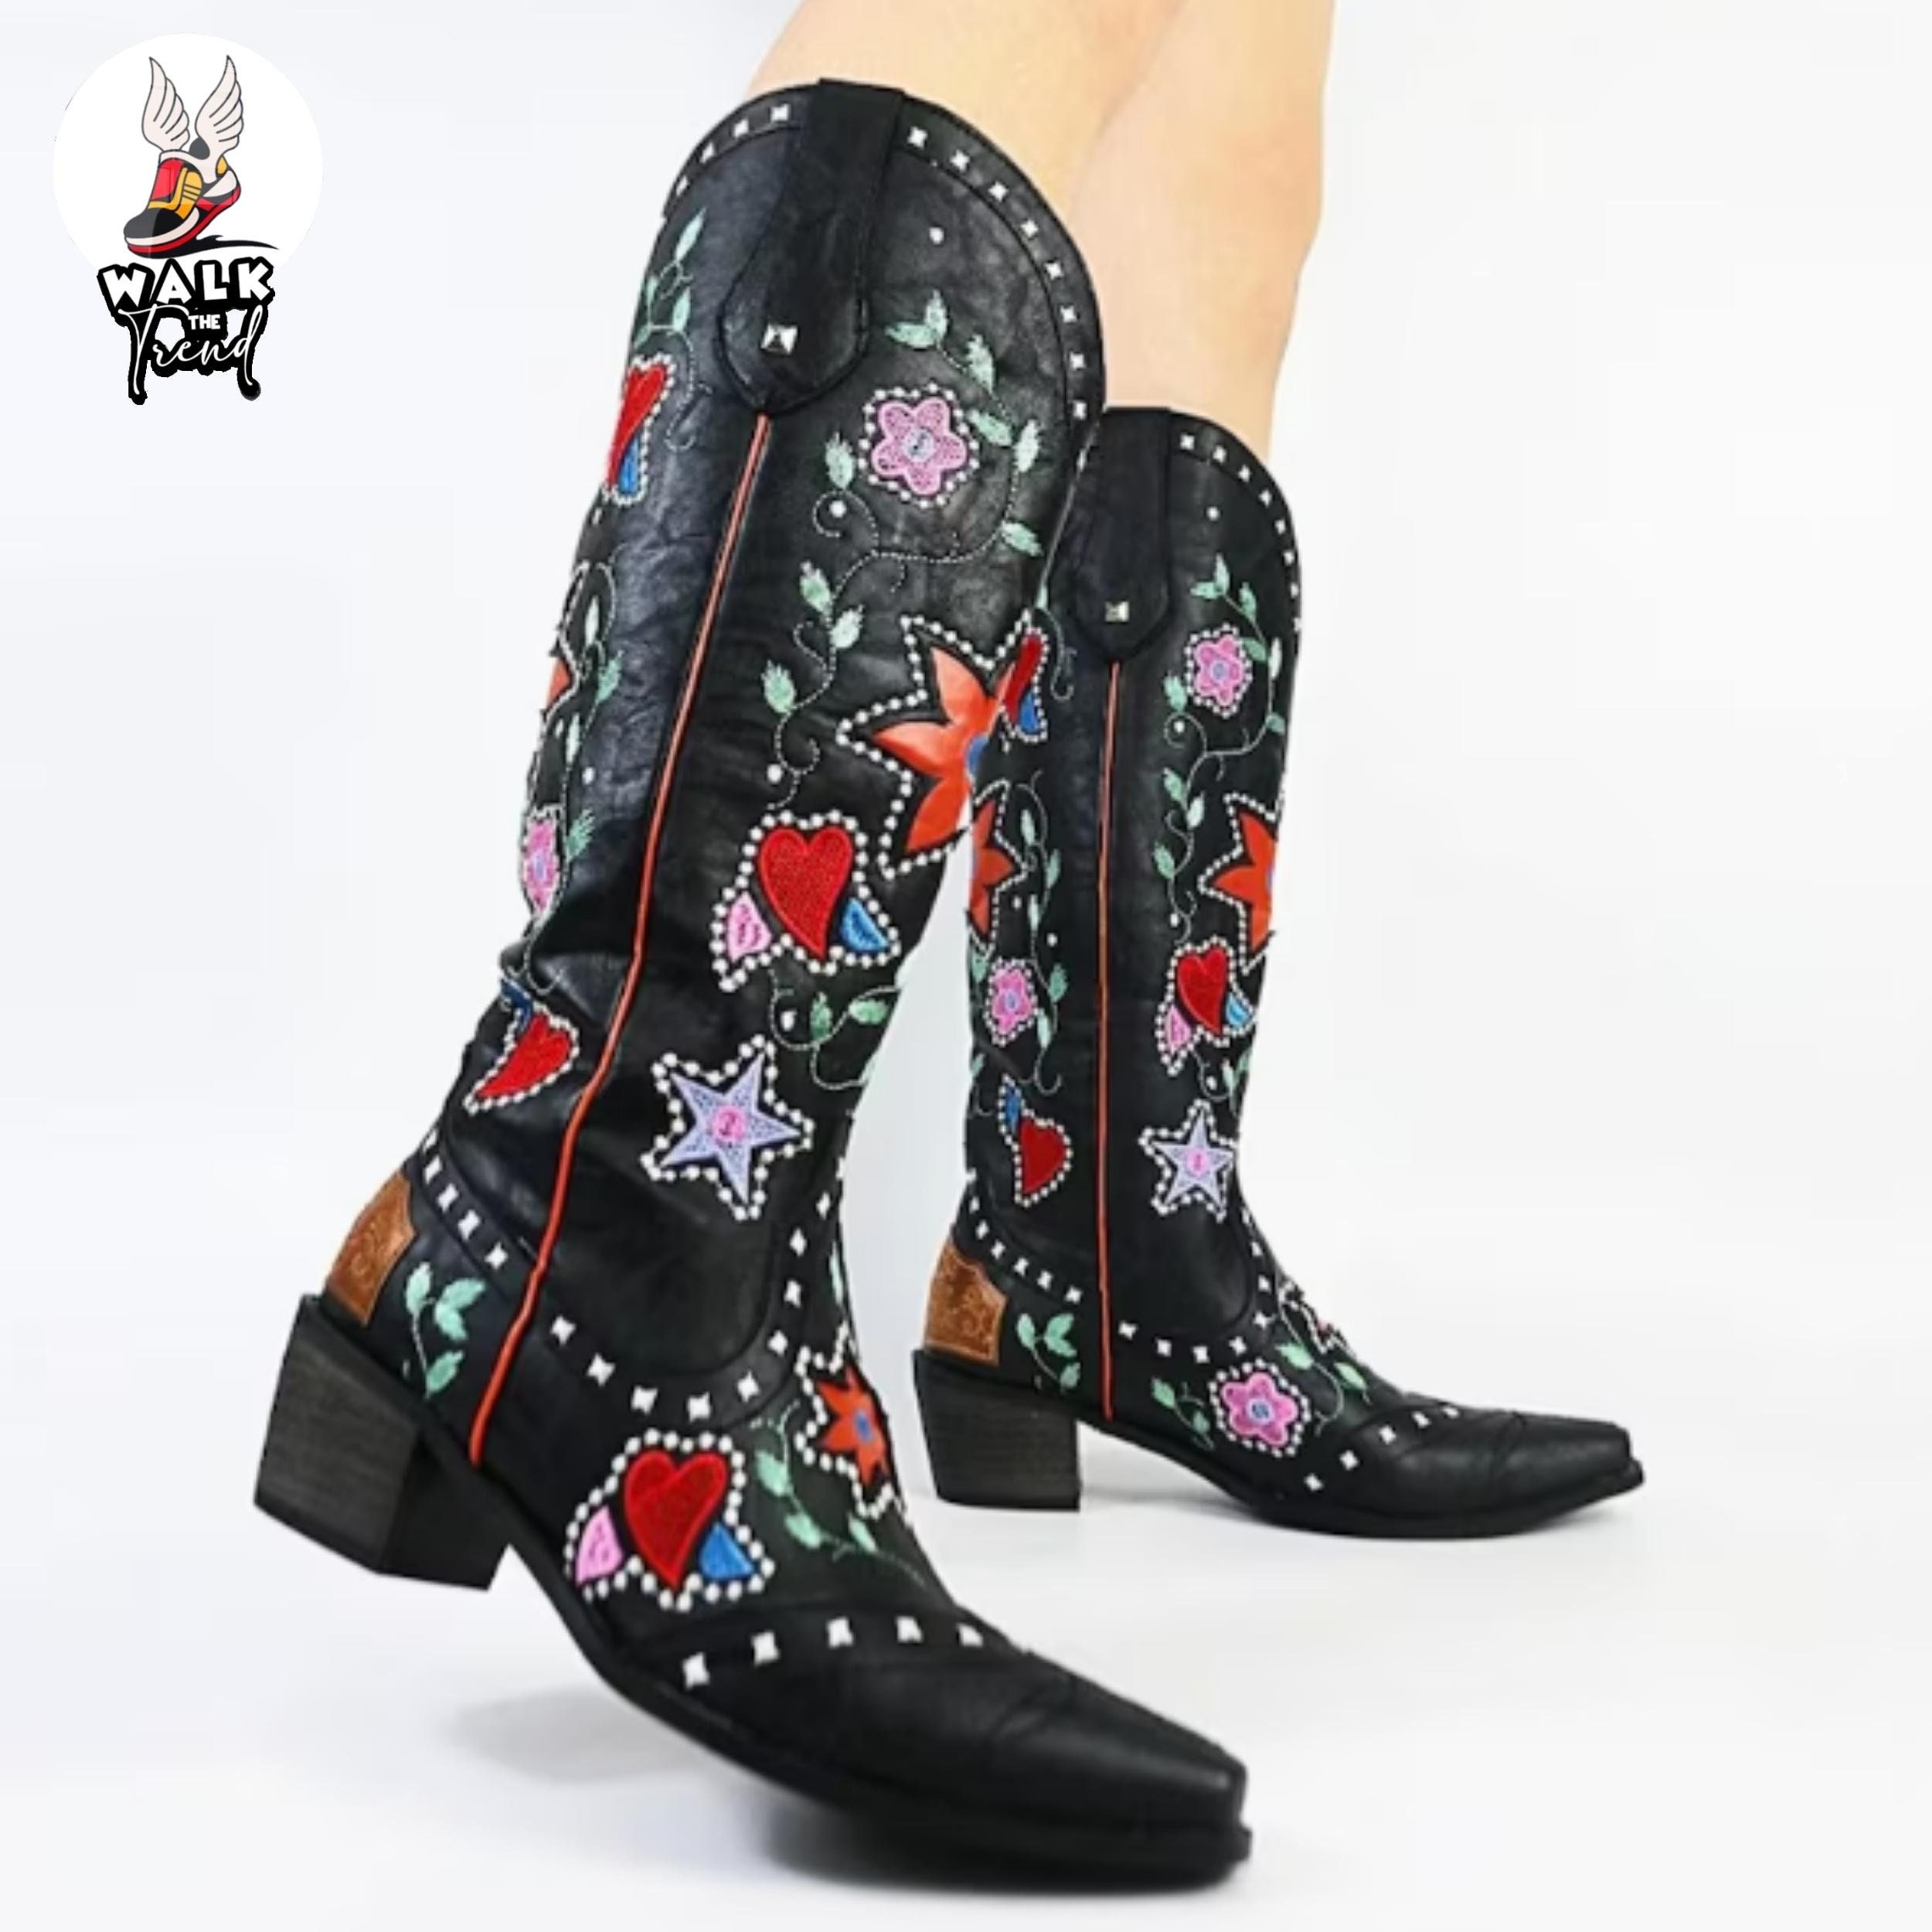 Y2K Black Cowboy Boots - Premium PU Leather Knee High Western Boots